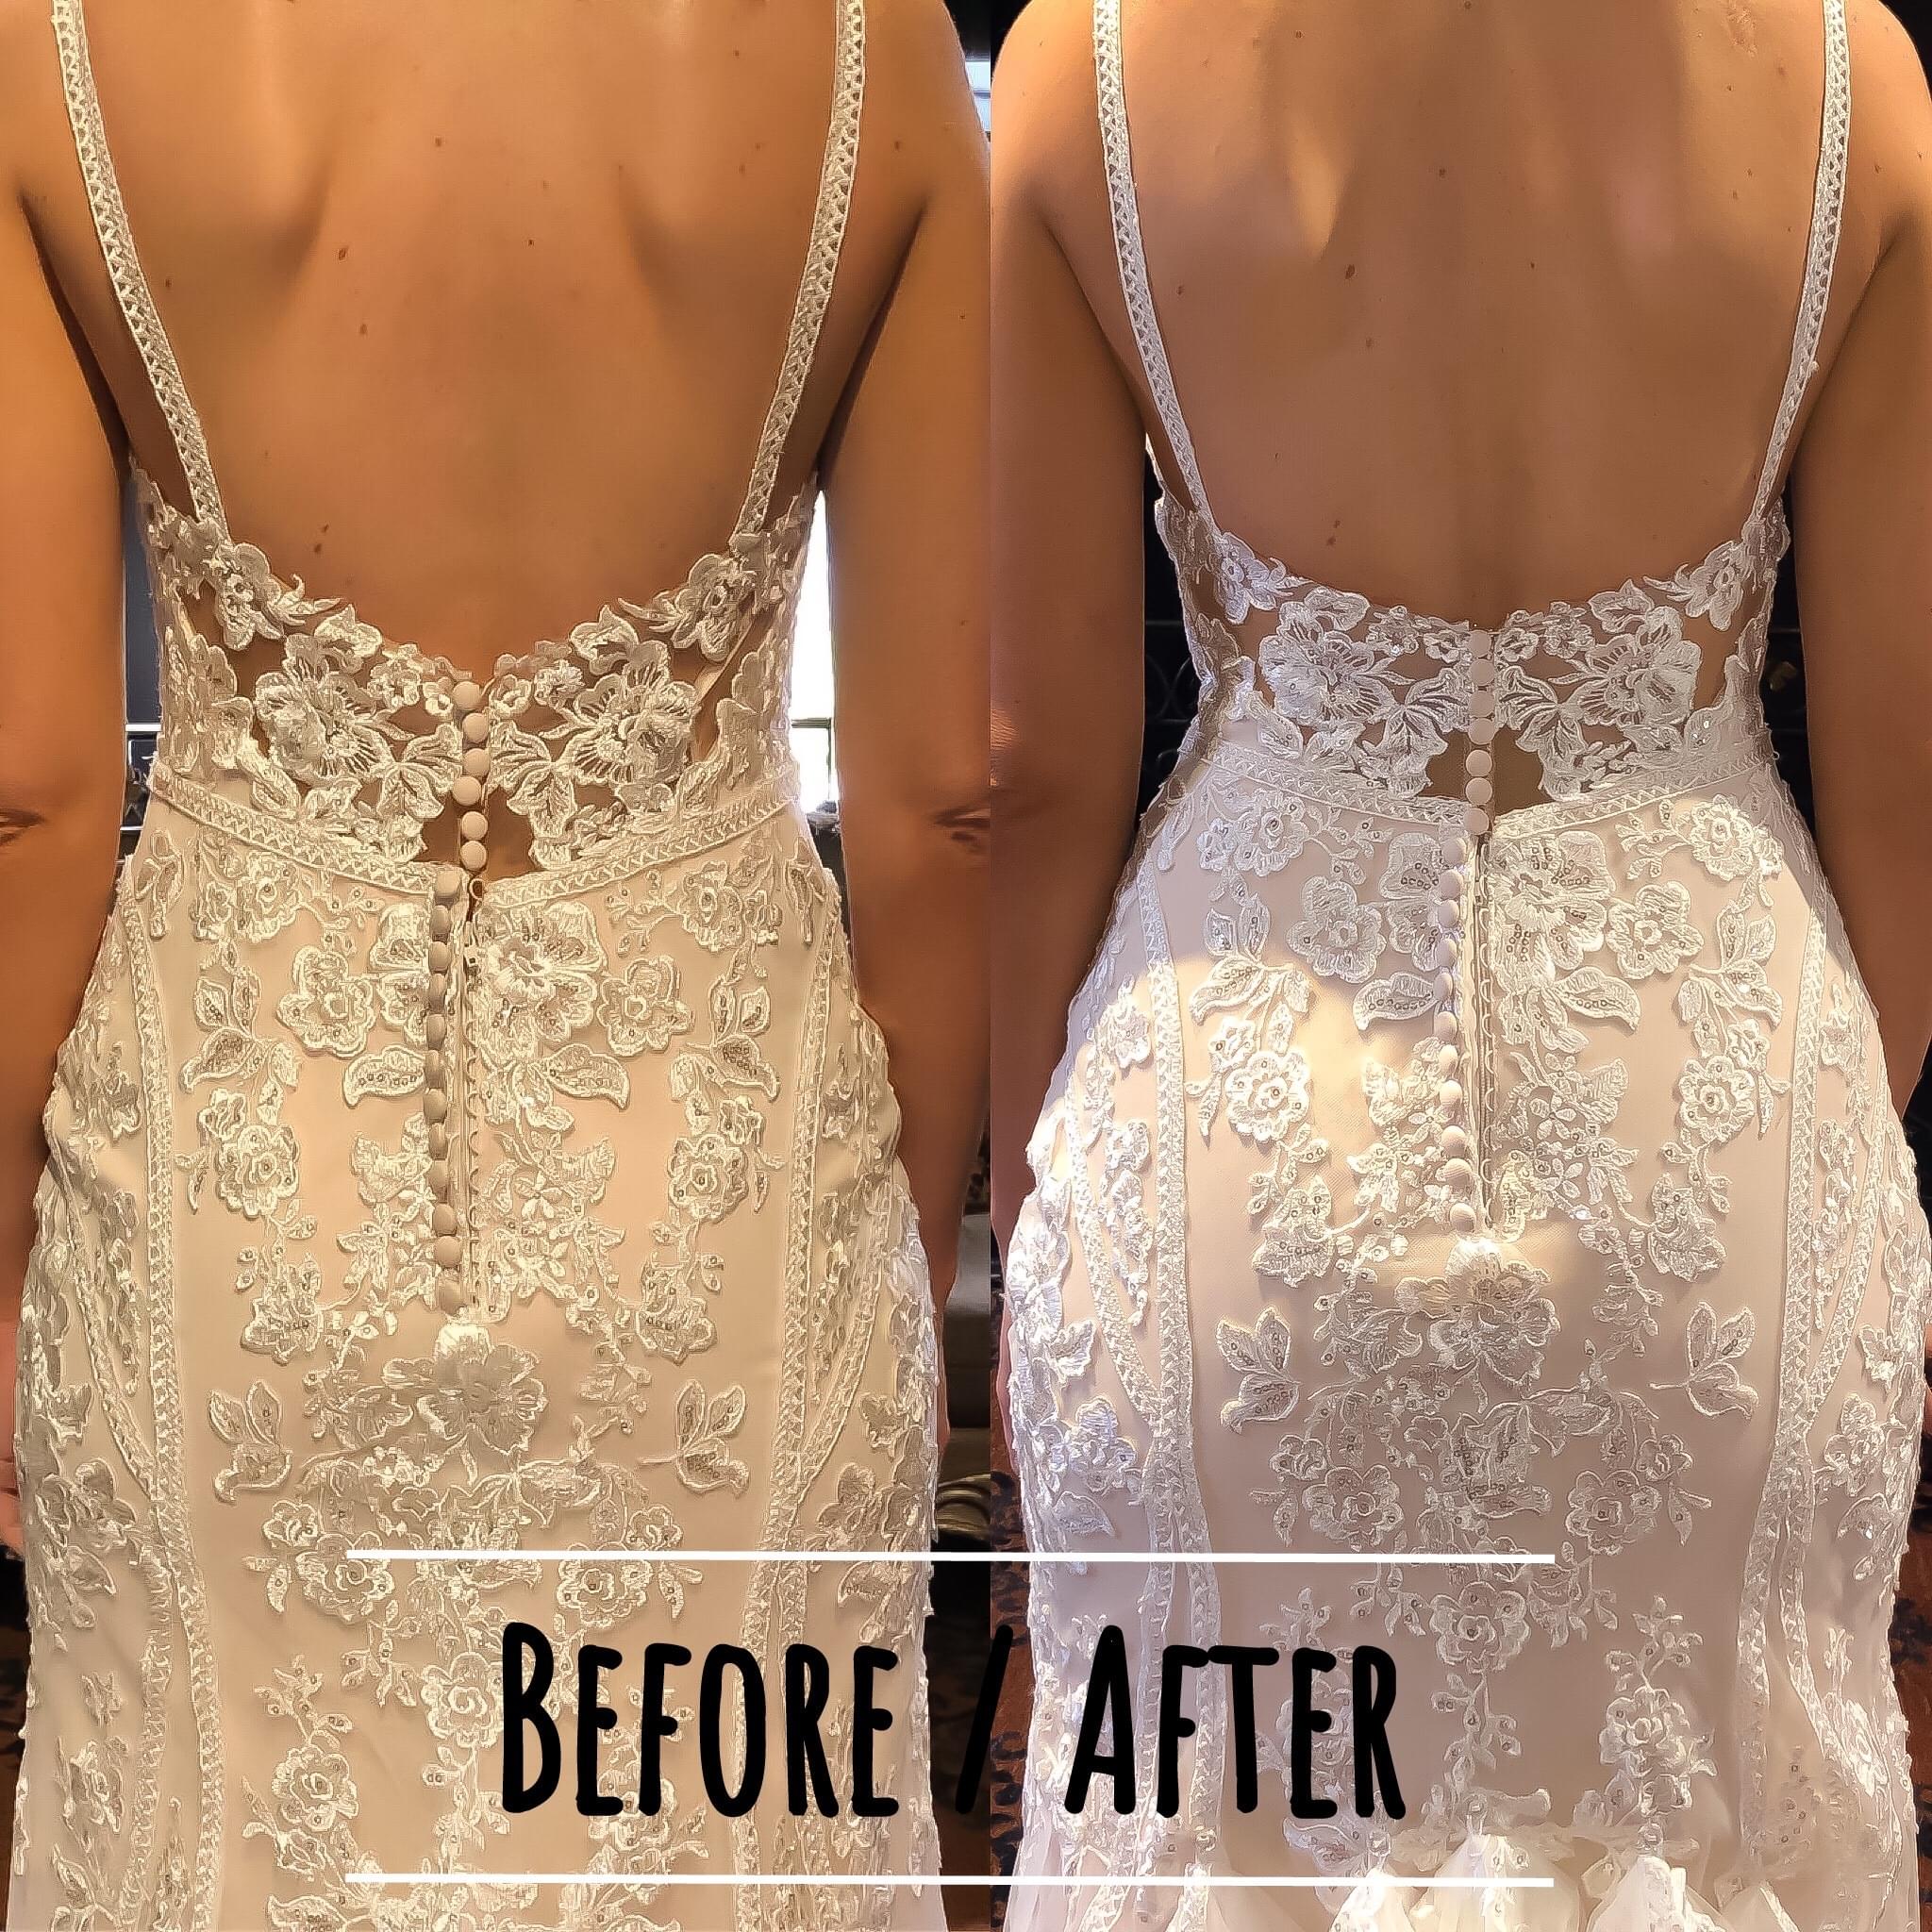 Before and after picture from Alterations